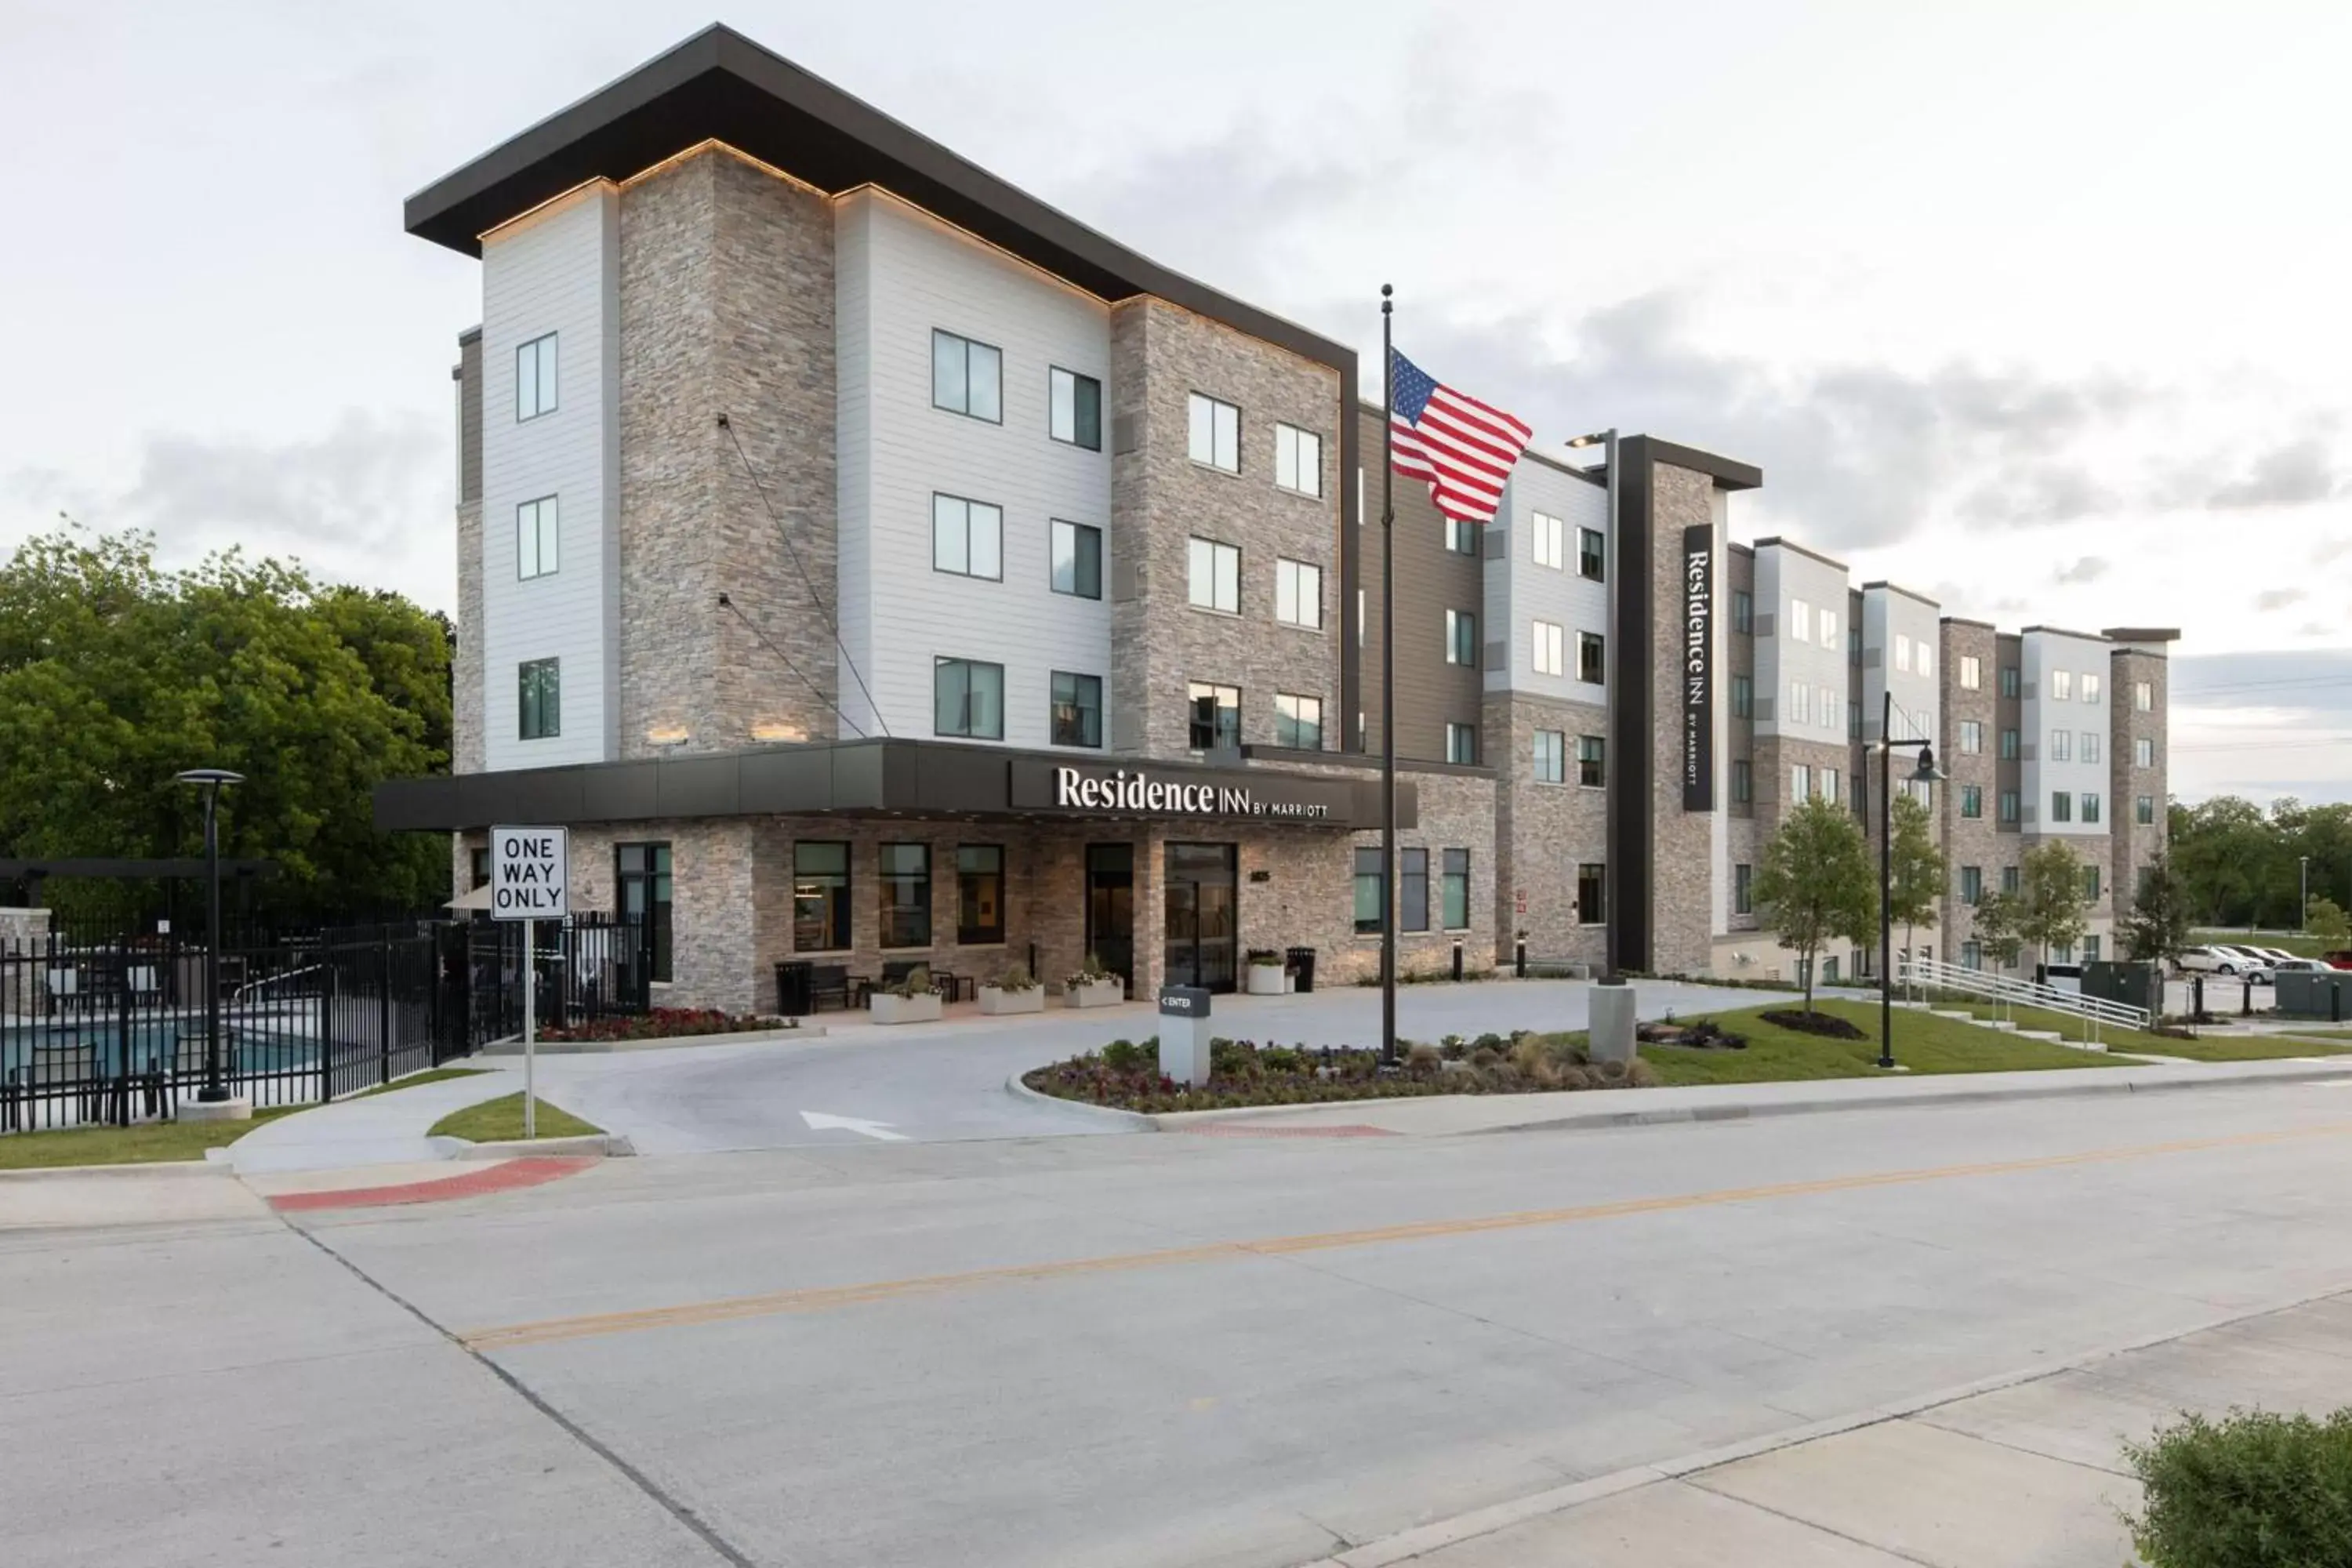 Property Building in Residence Inn by Marriott Fort Worth Southwest